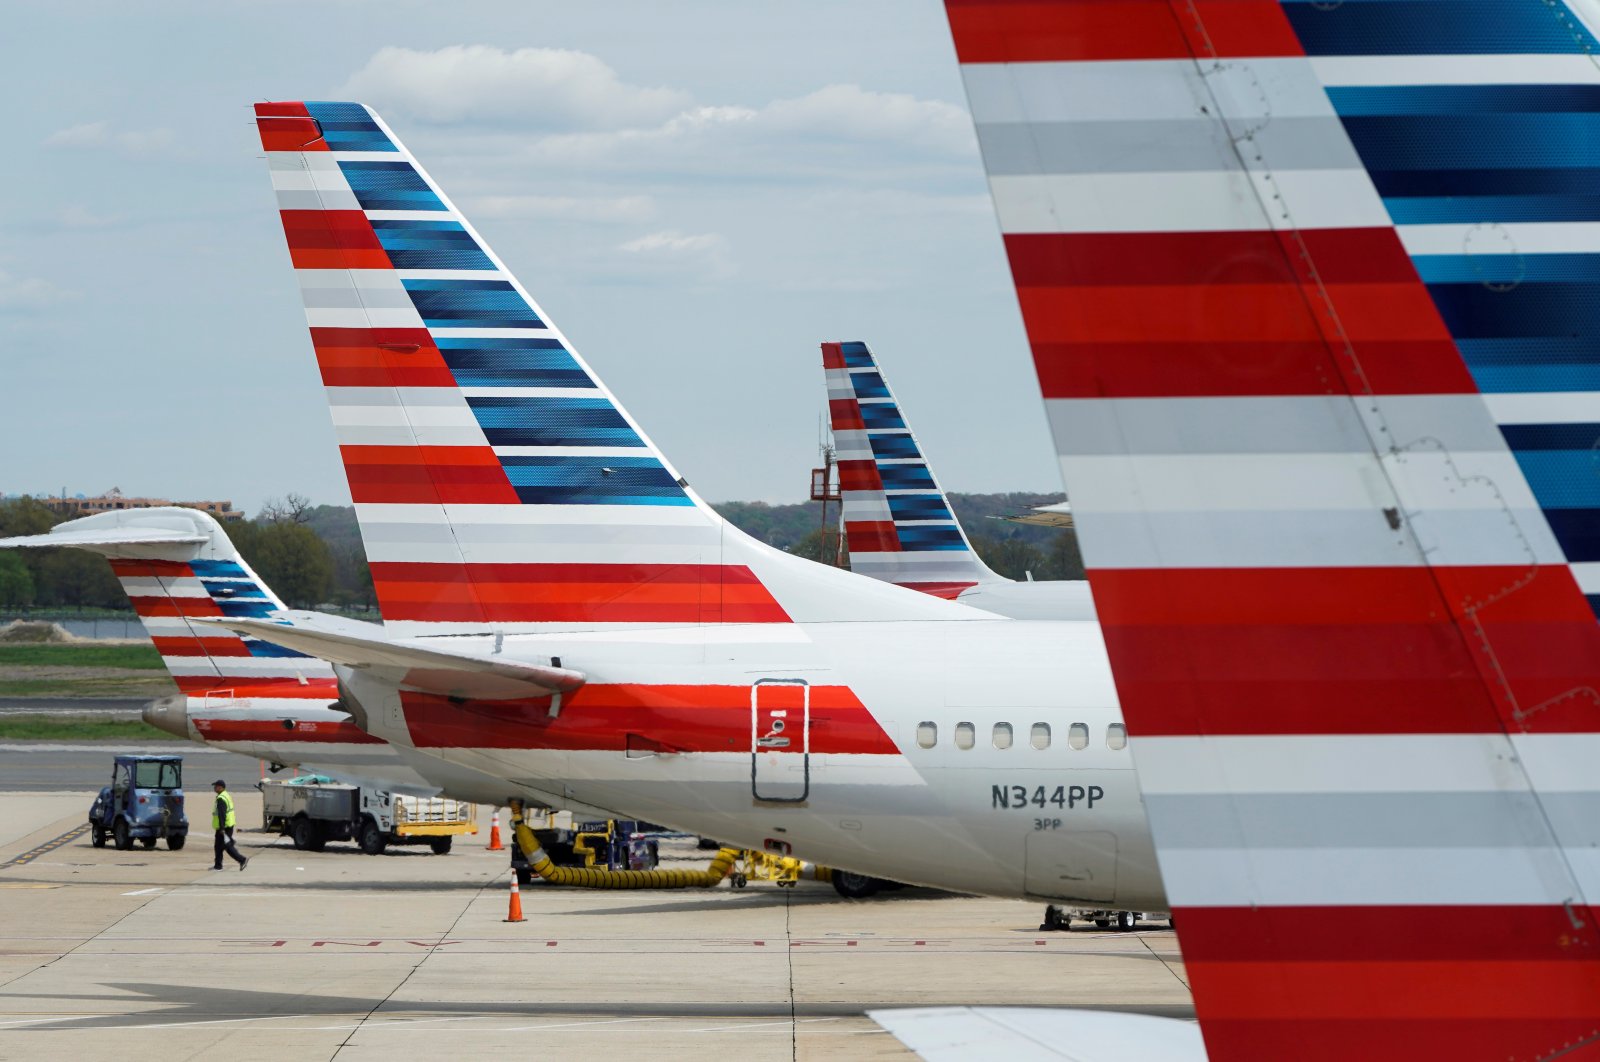 A member of a ground crew walks past American Airlines planes parked at the gate during the coronavirus disease (COVID-19) outbreak at Ronald Reagan National Airport in Washington, U.S., April 5, 2020. (Reuters Photo)